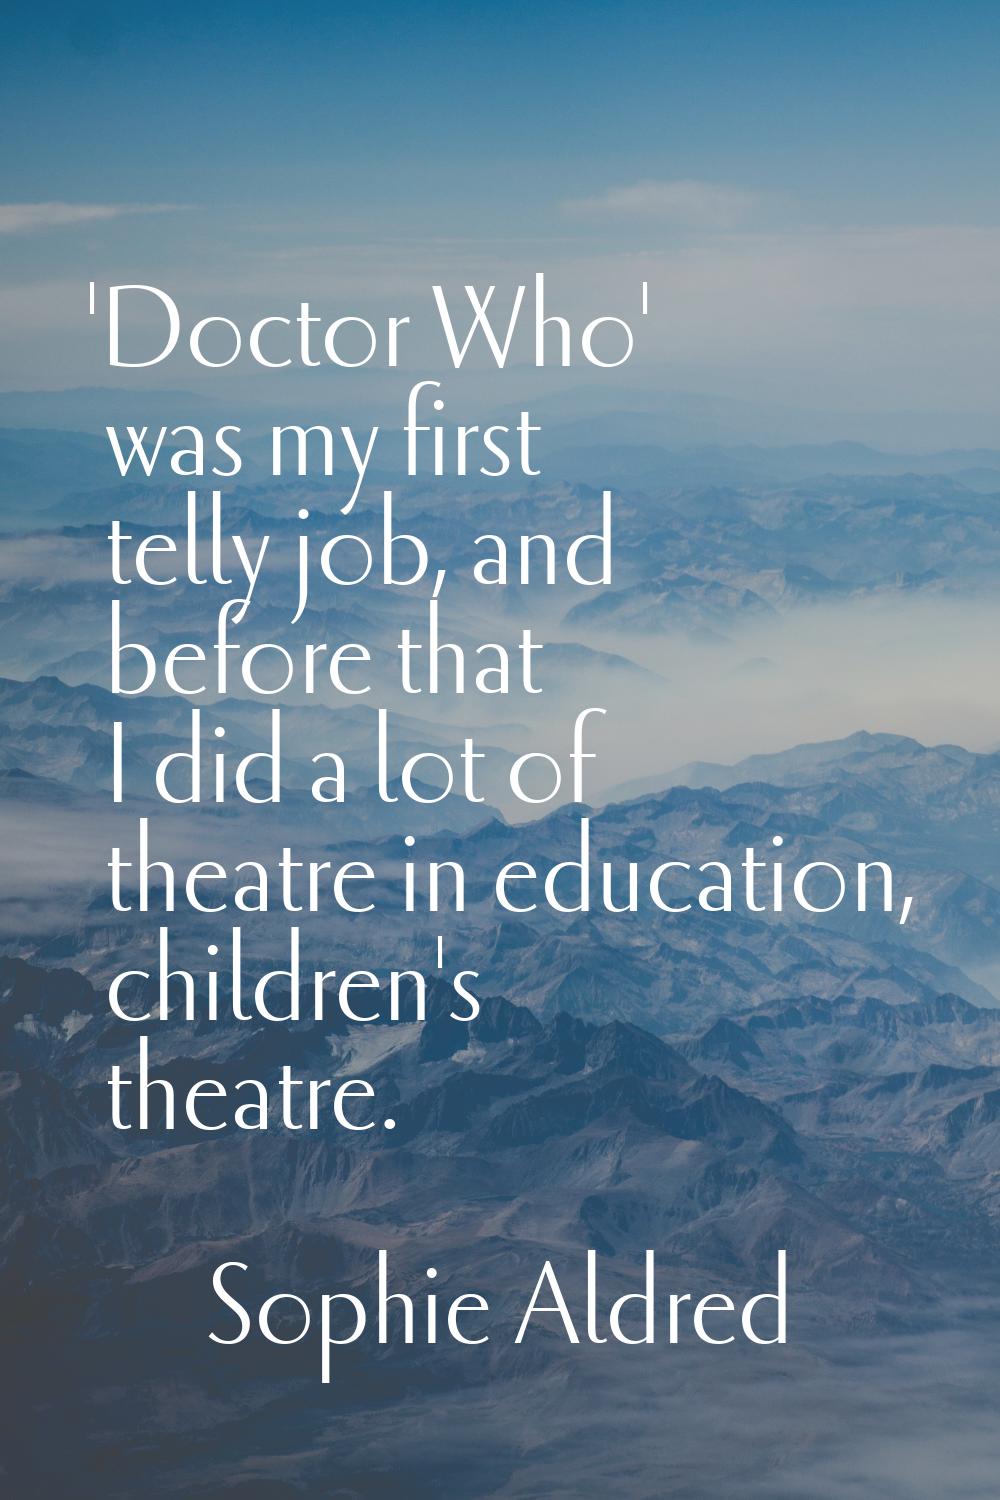 'Doctor Who' was my first telly job, and before that I did a lot of theatre in education, children'